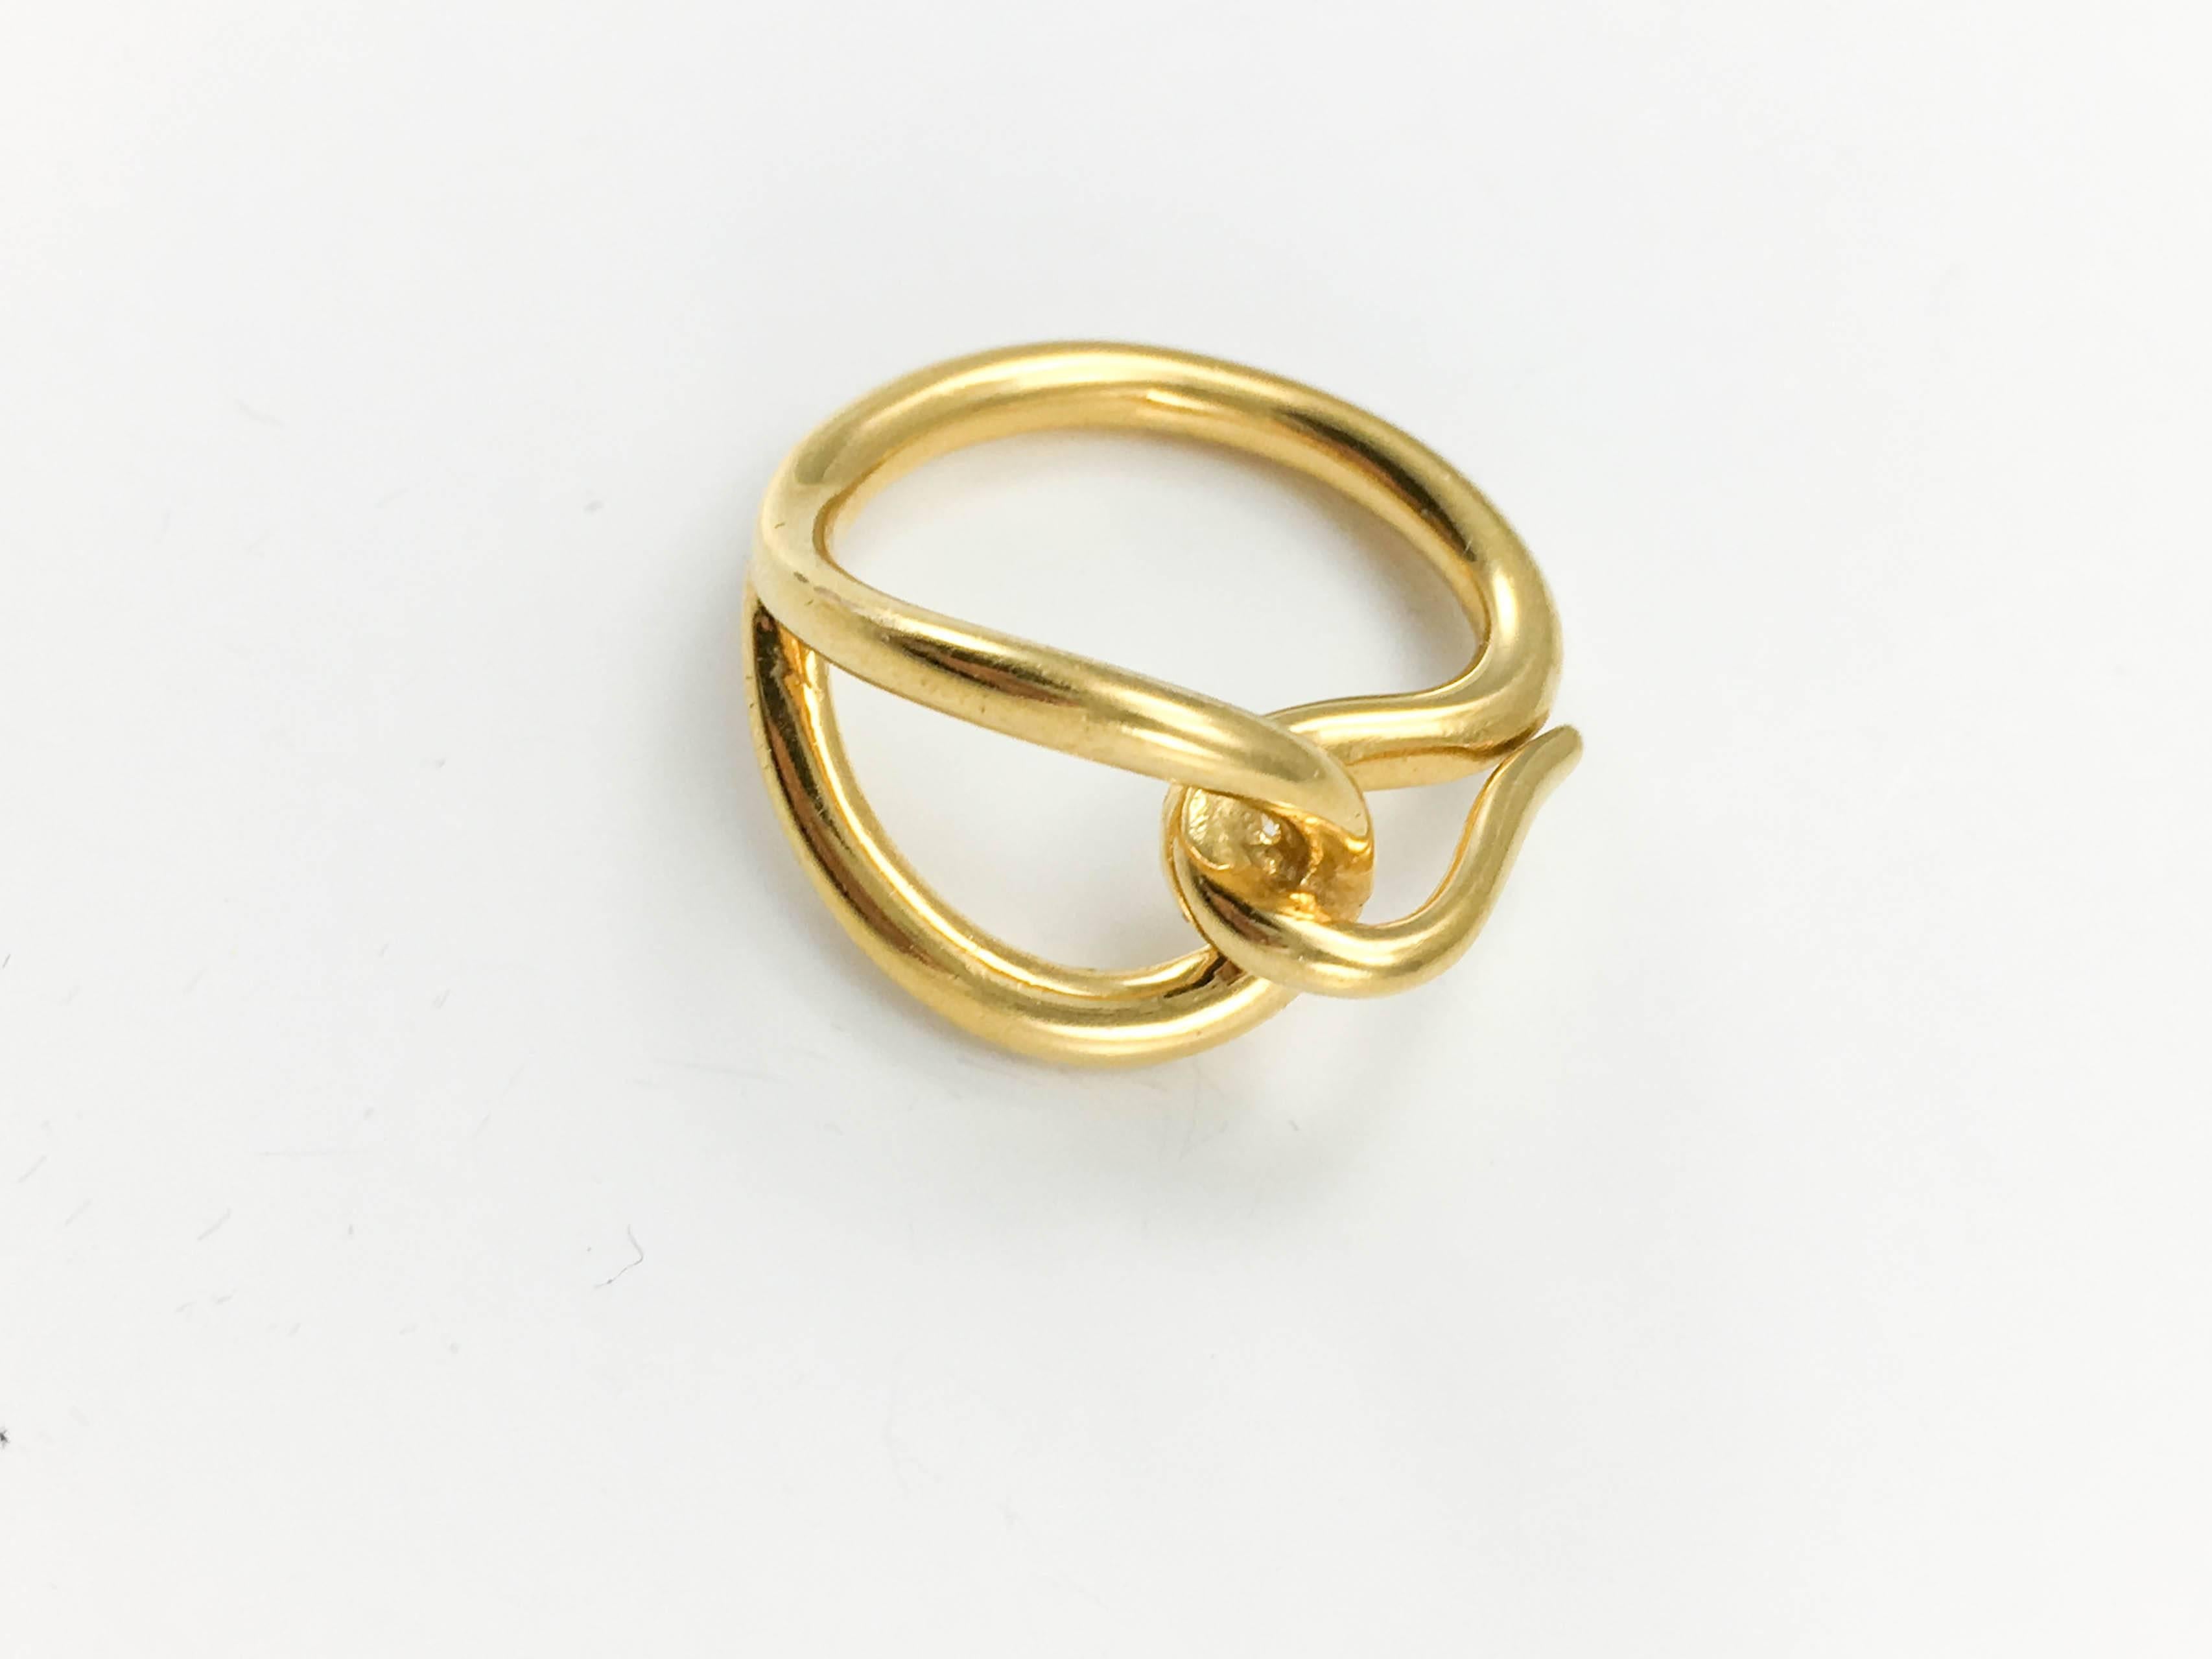 Hermes Gold-Tone Scarf Ring In Excellent Condition In London, Chelsea